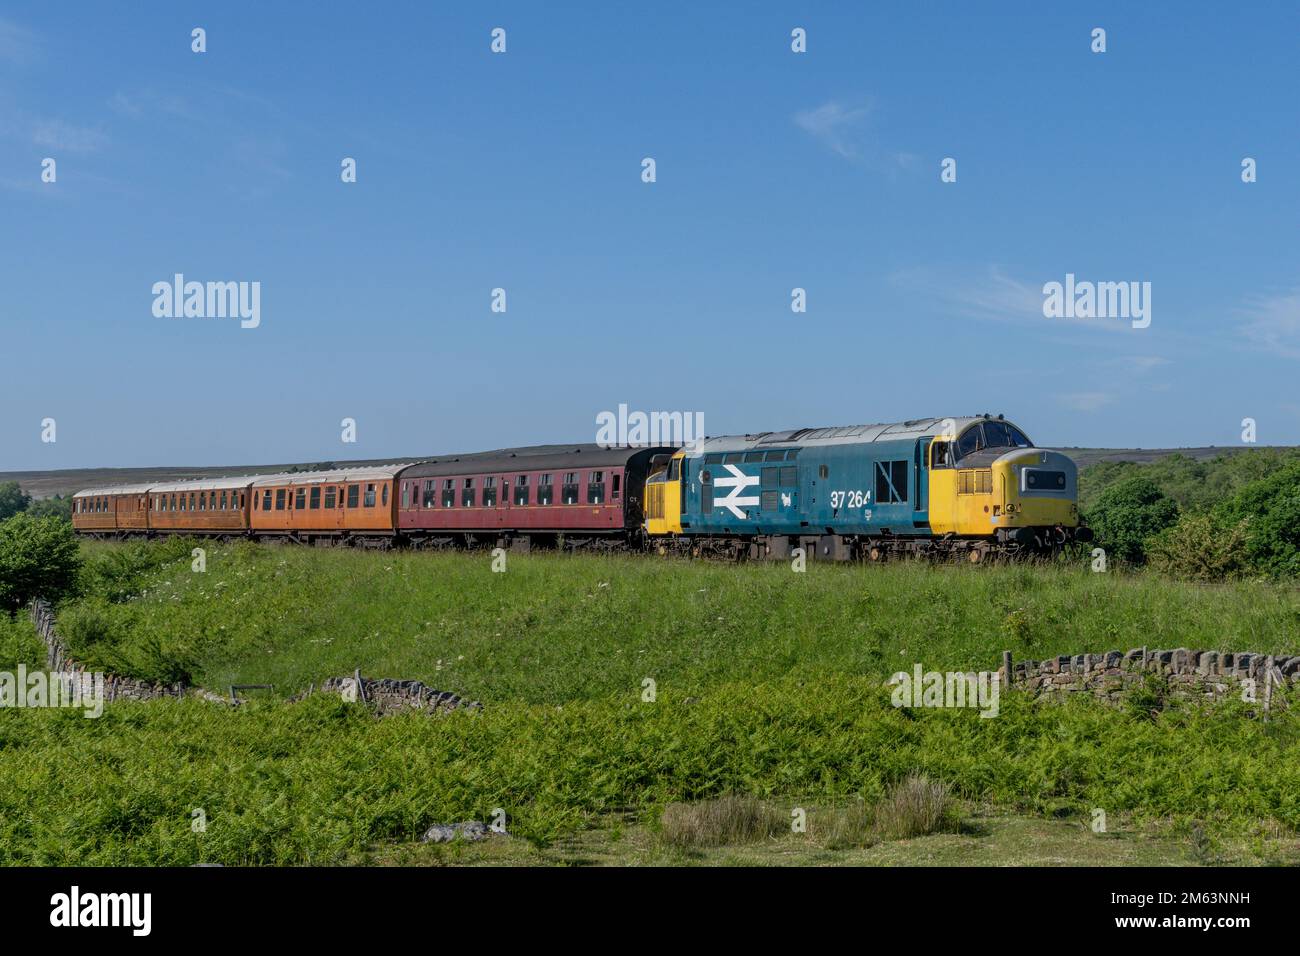 Vintage Diesel train locomotive pulling carriages and passengers on the North Yorkshire Moors Railway between Whitby and Pickering Stock Photo